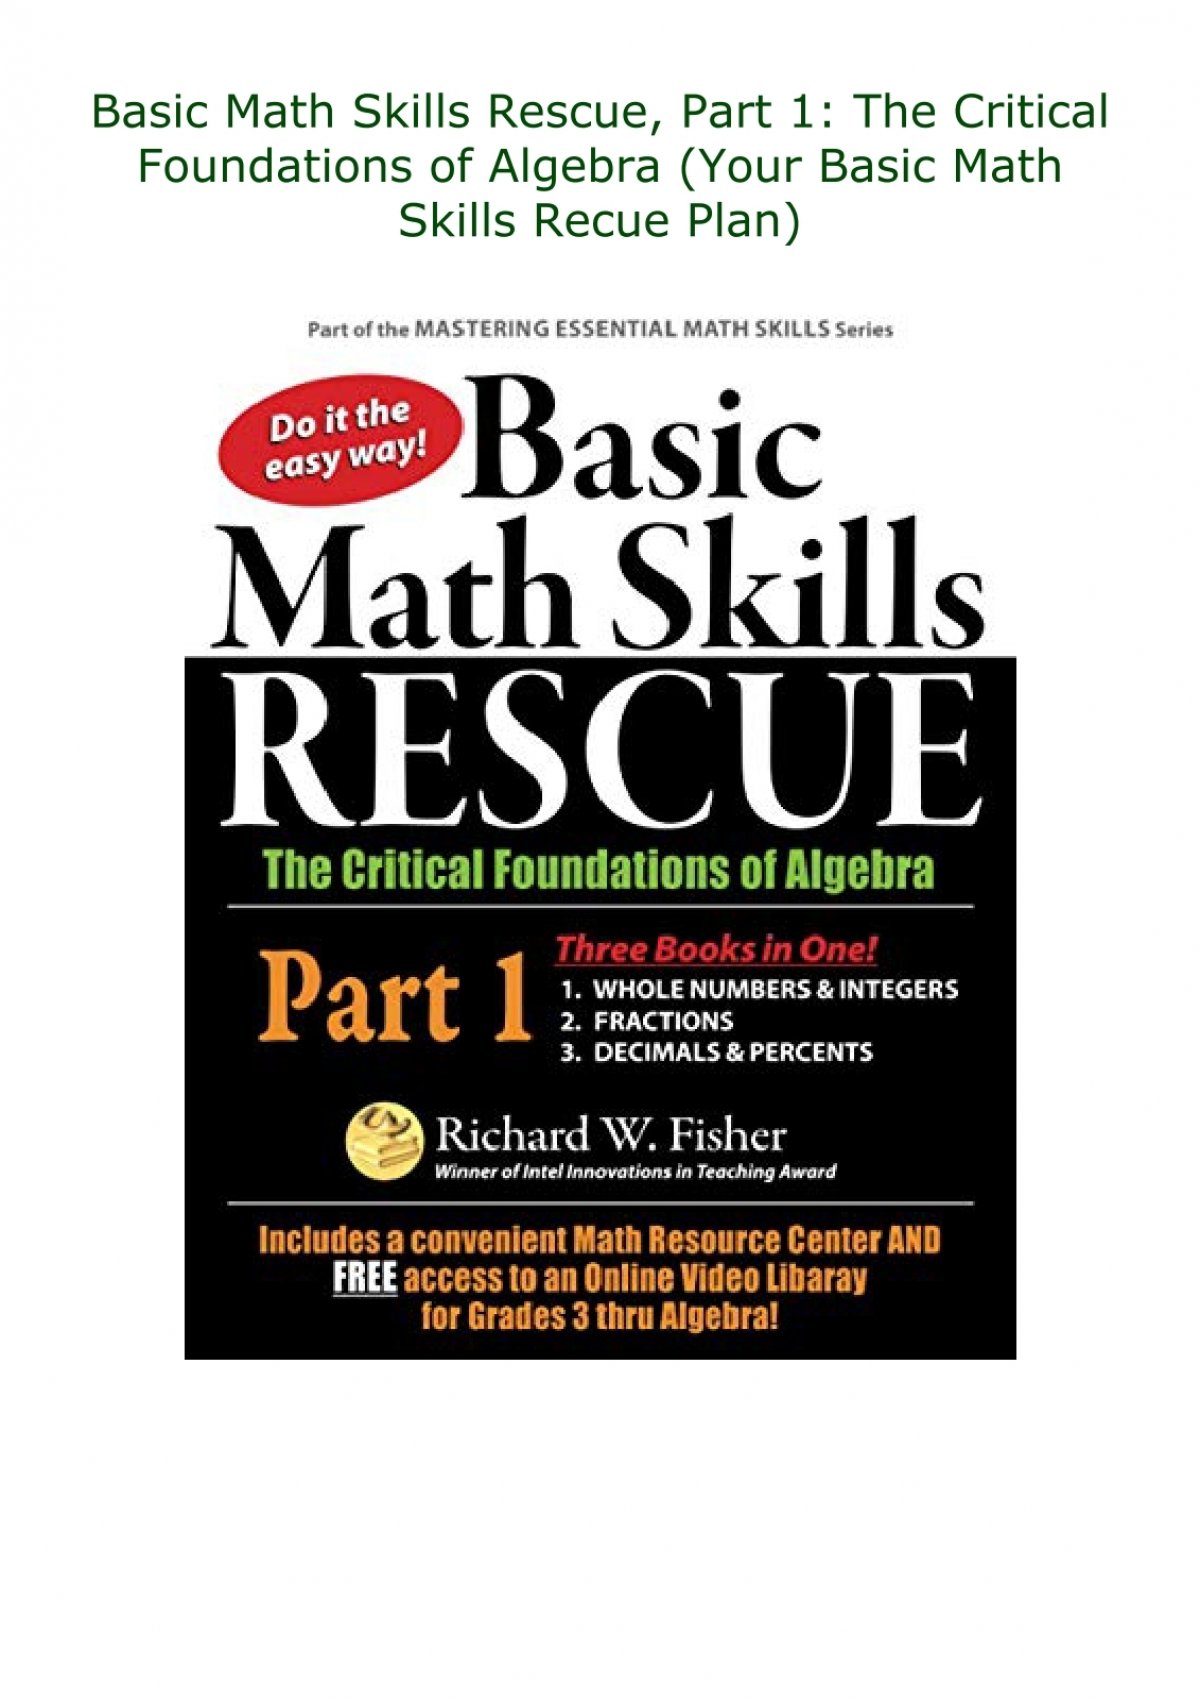 pdf-basic-math-skills-rescue-part-1-the-critical-foundations-of